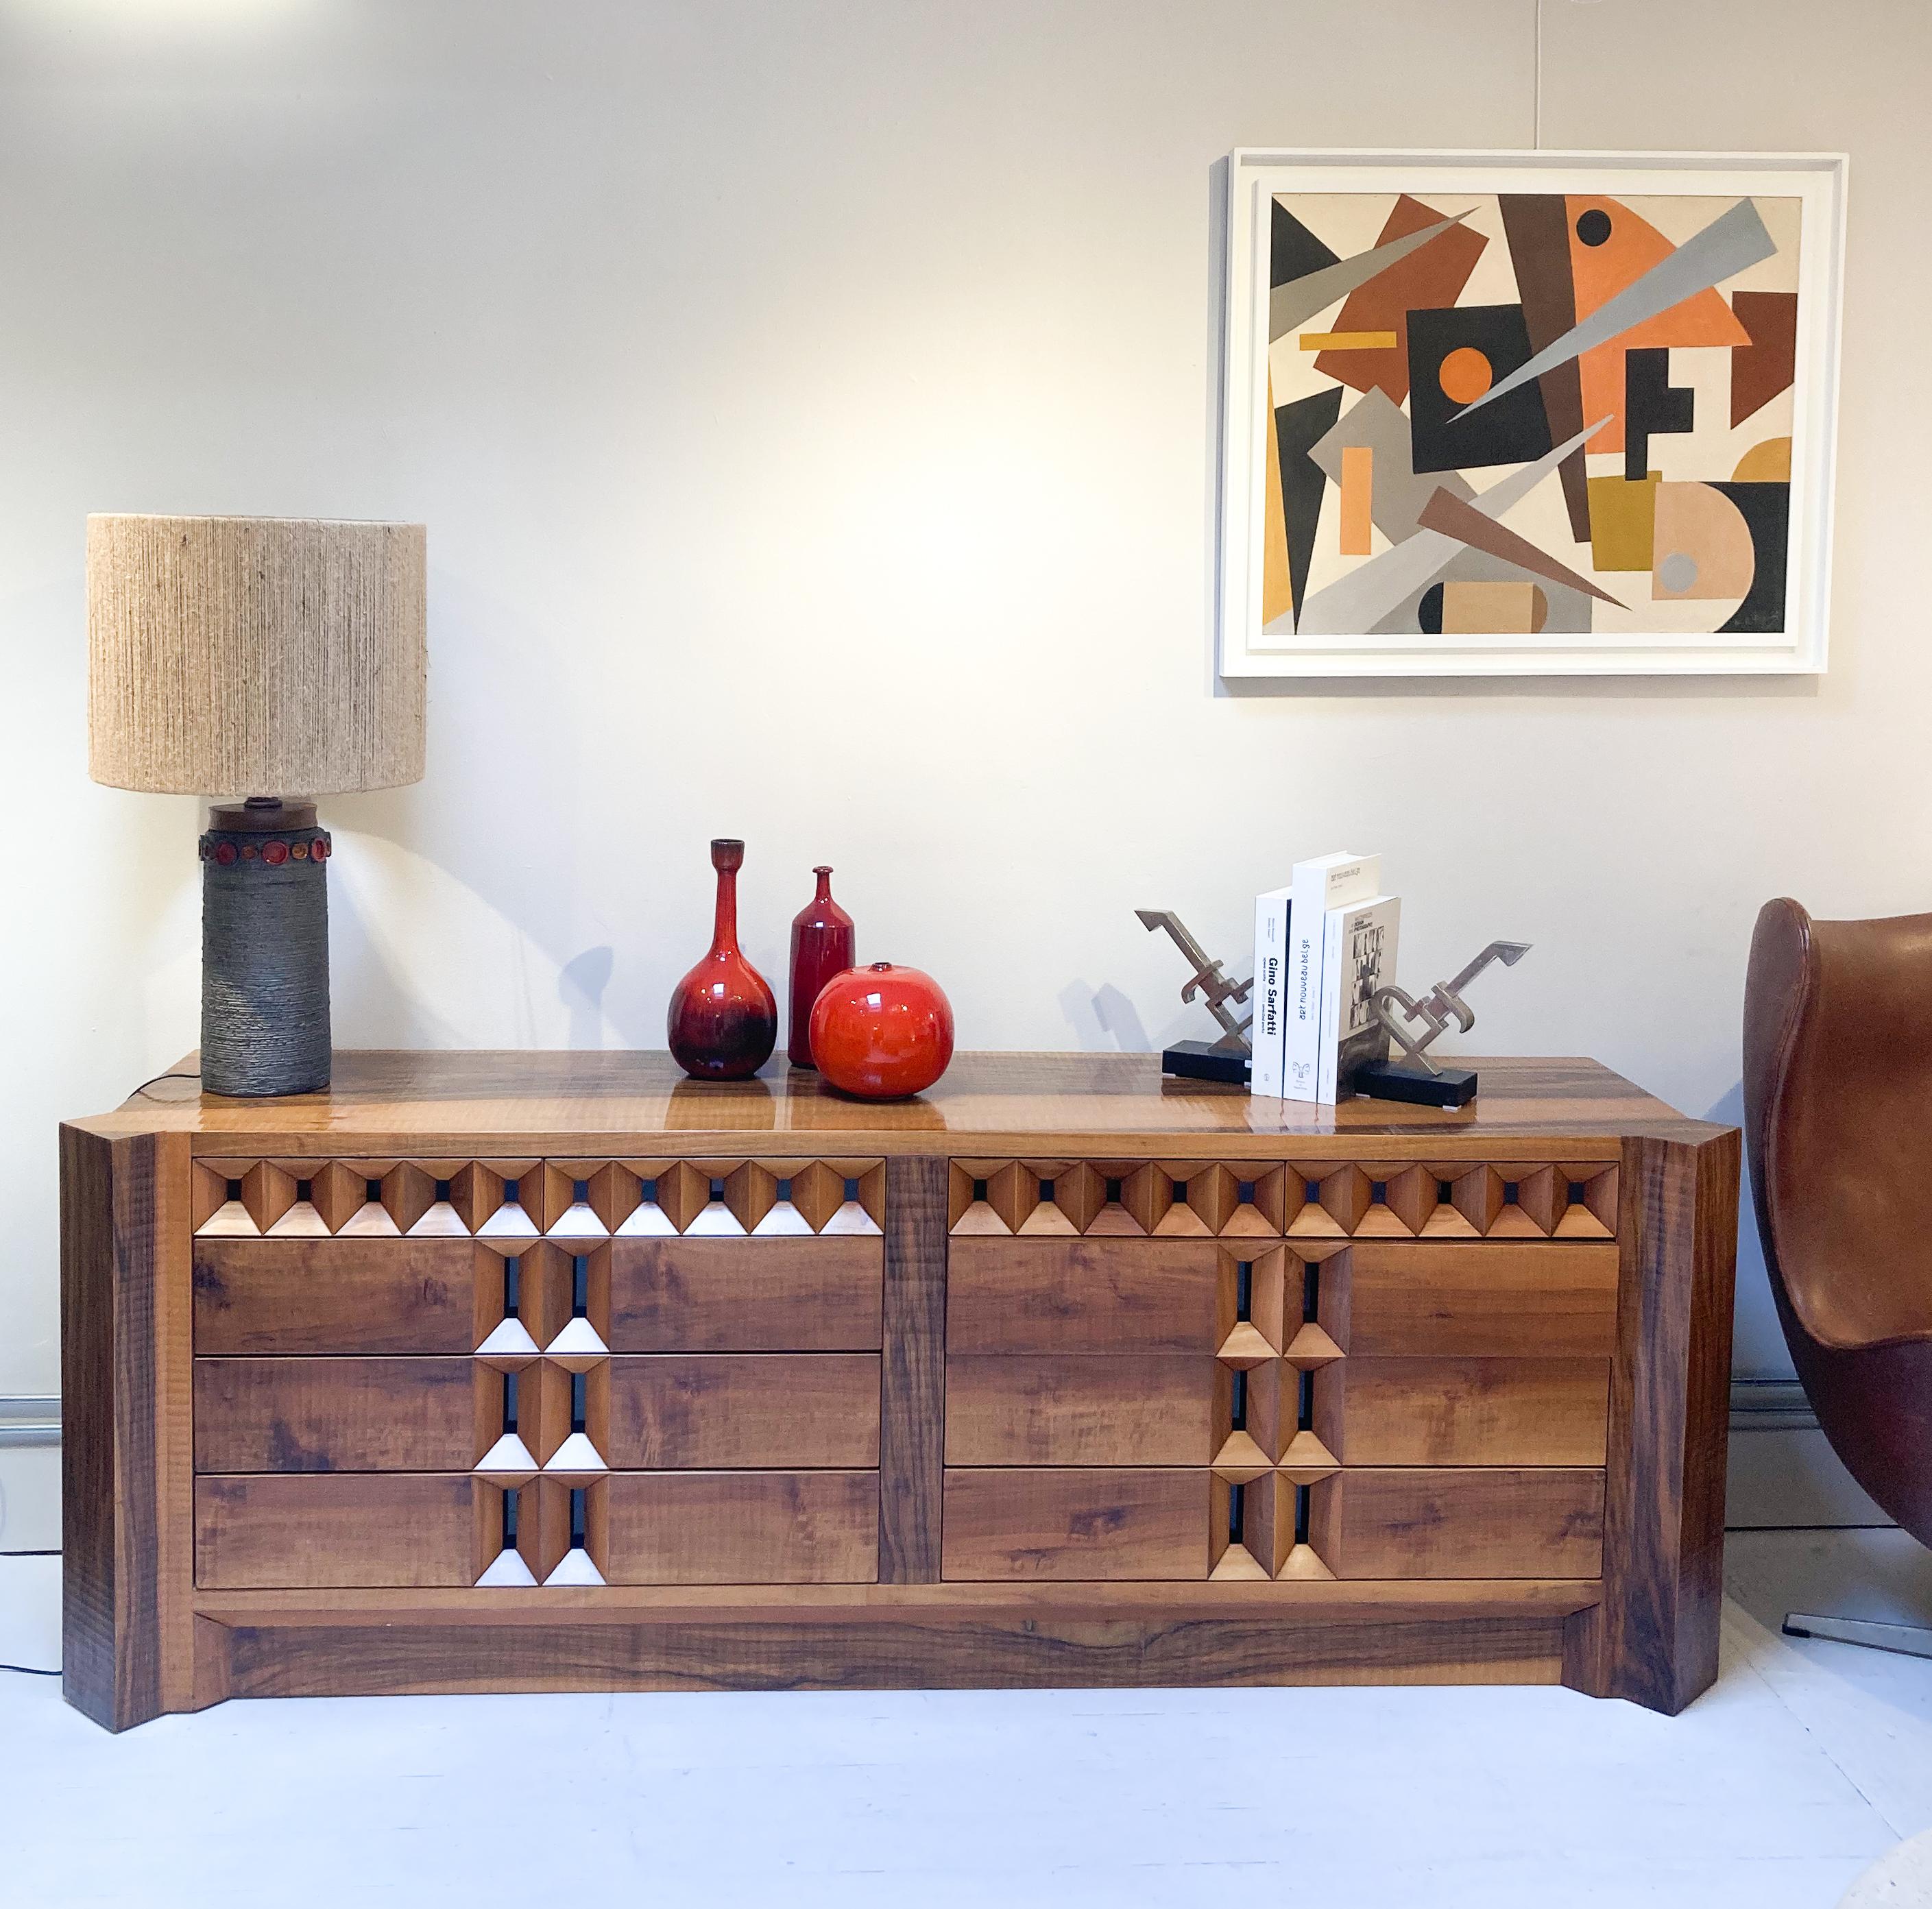 Mid-Century Modern sideboard with drawers by Guiseppe Rivadossi, 1970s


Giuseppe Rivadossi, born in Monteclana di Nave, Italy in 1935, still resides and works there today. He began his artistic journey as a woodcarver, creating works that